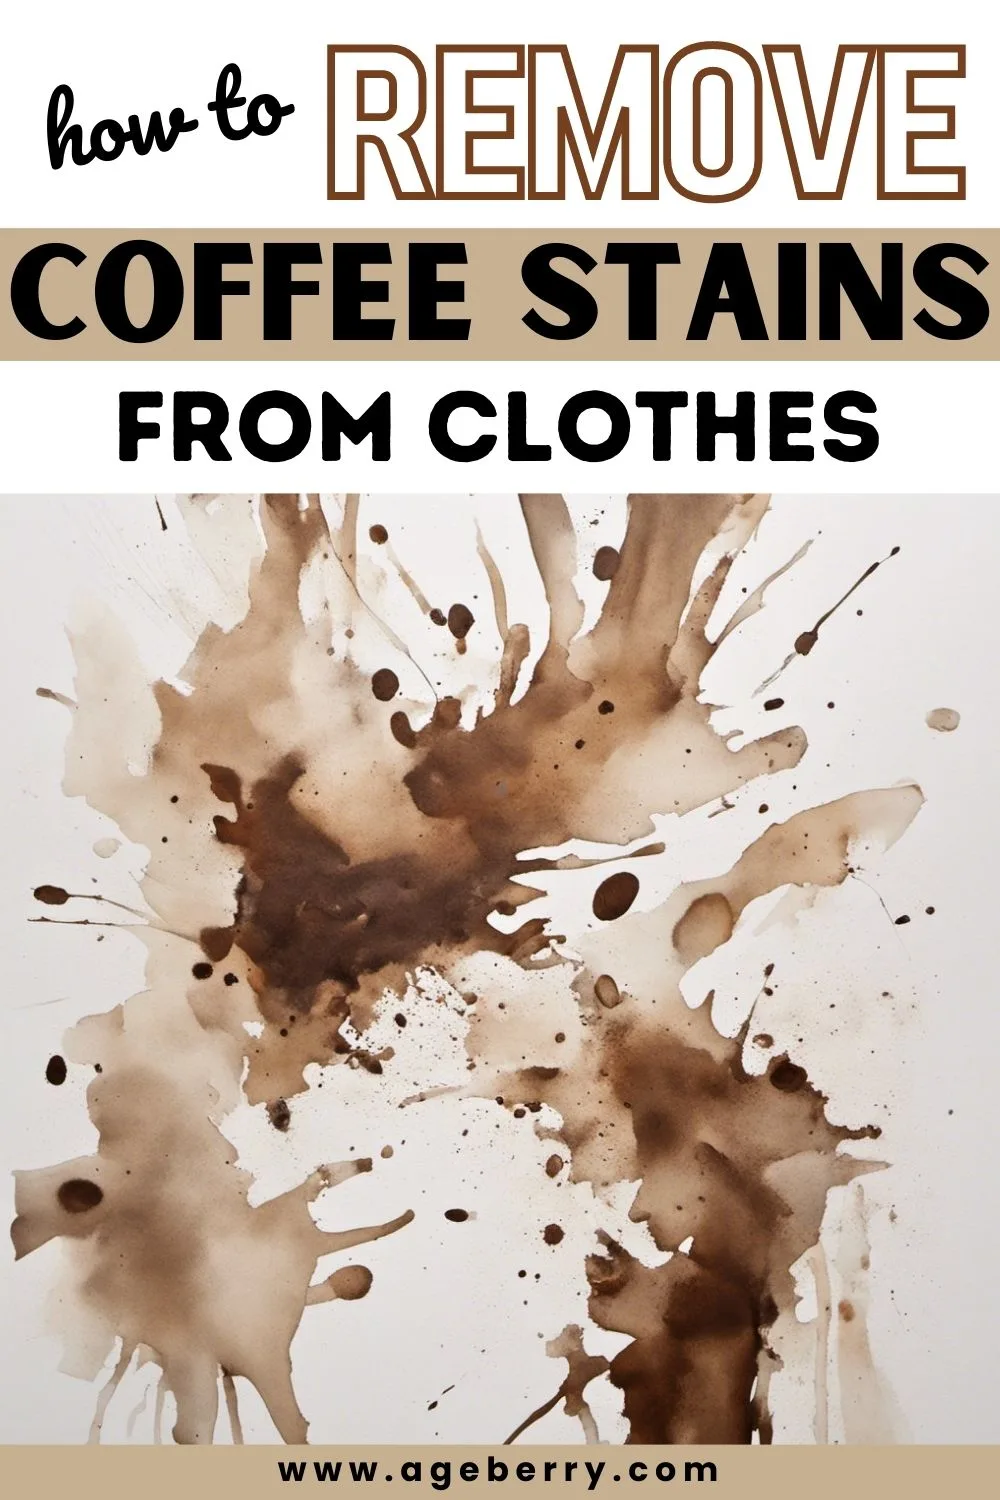 How to remove coffee stains from clothes